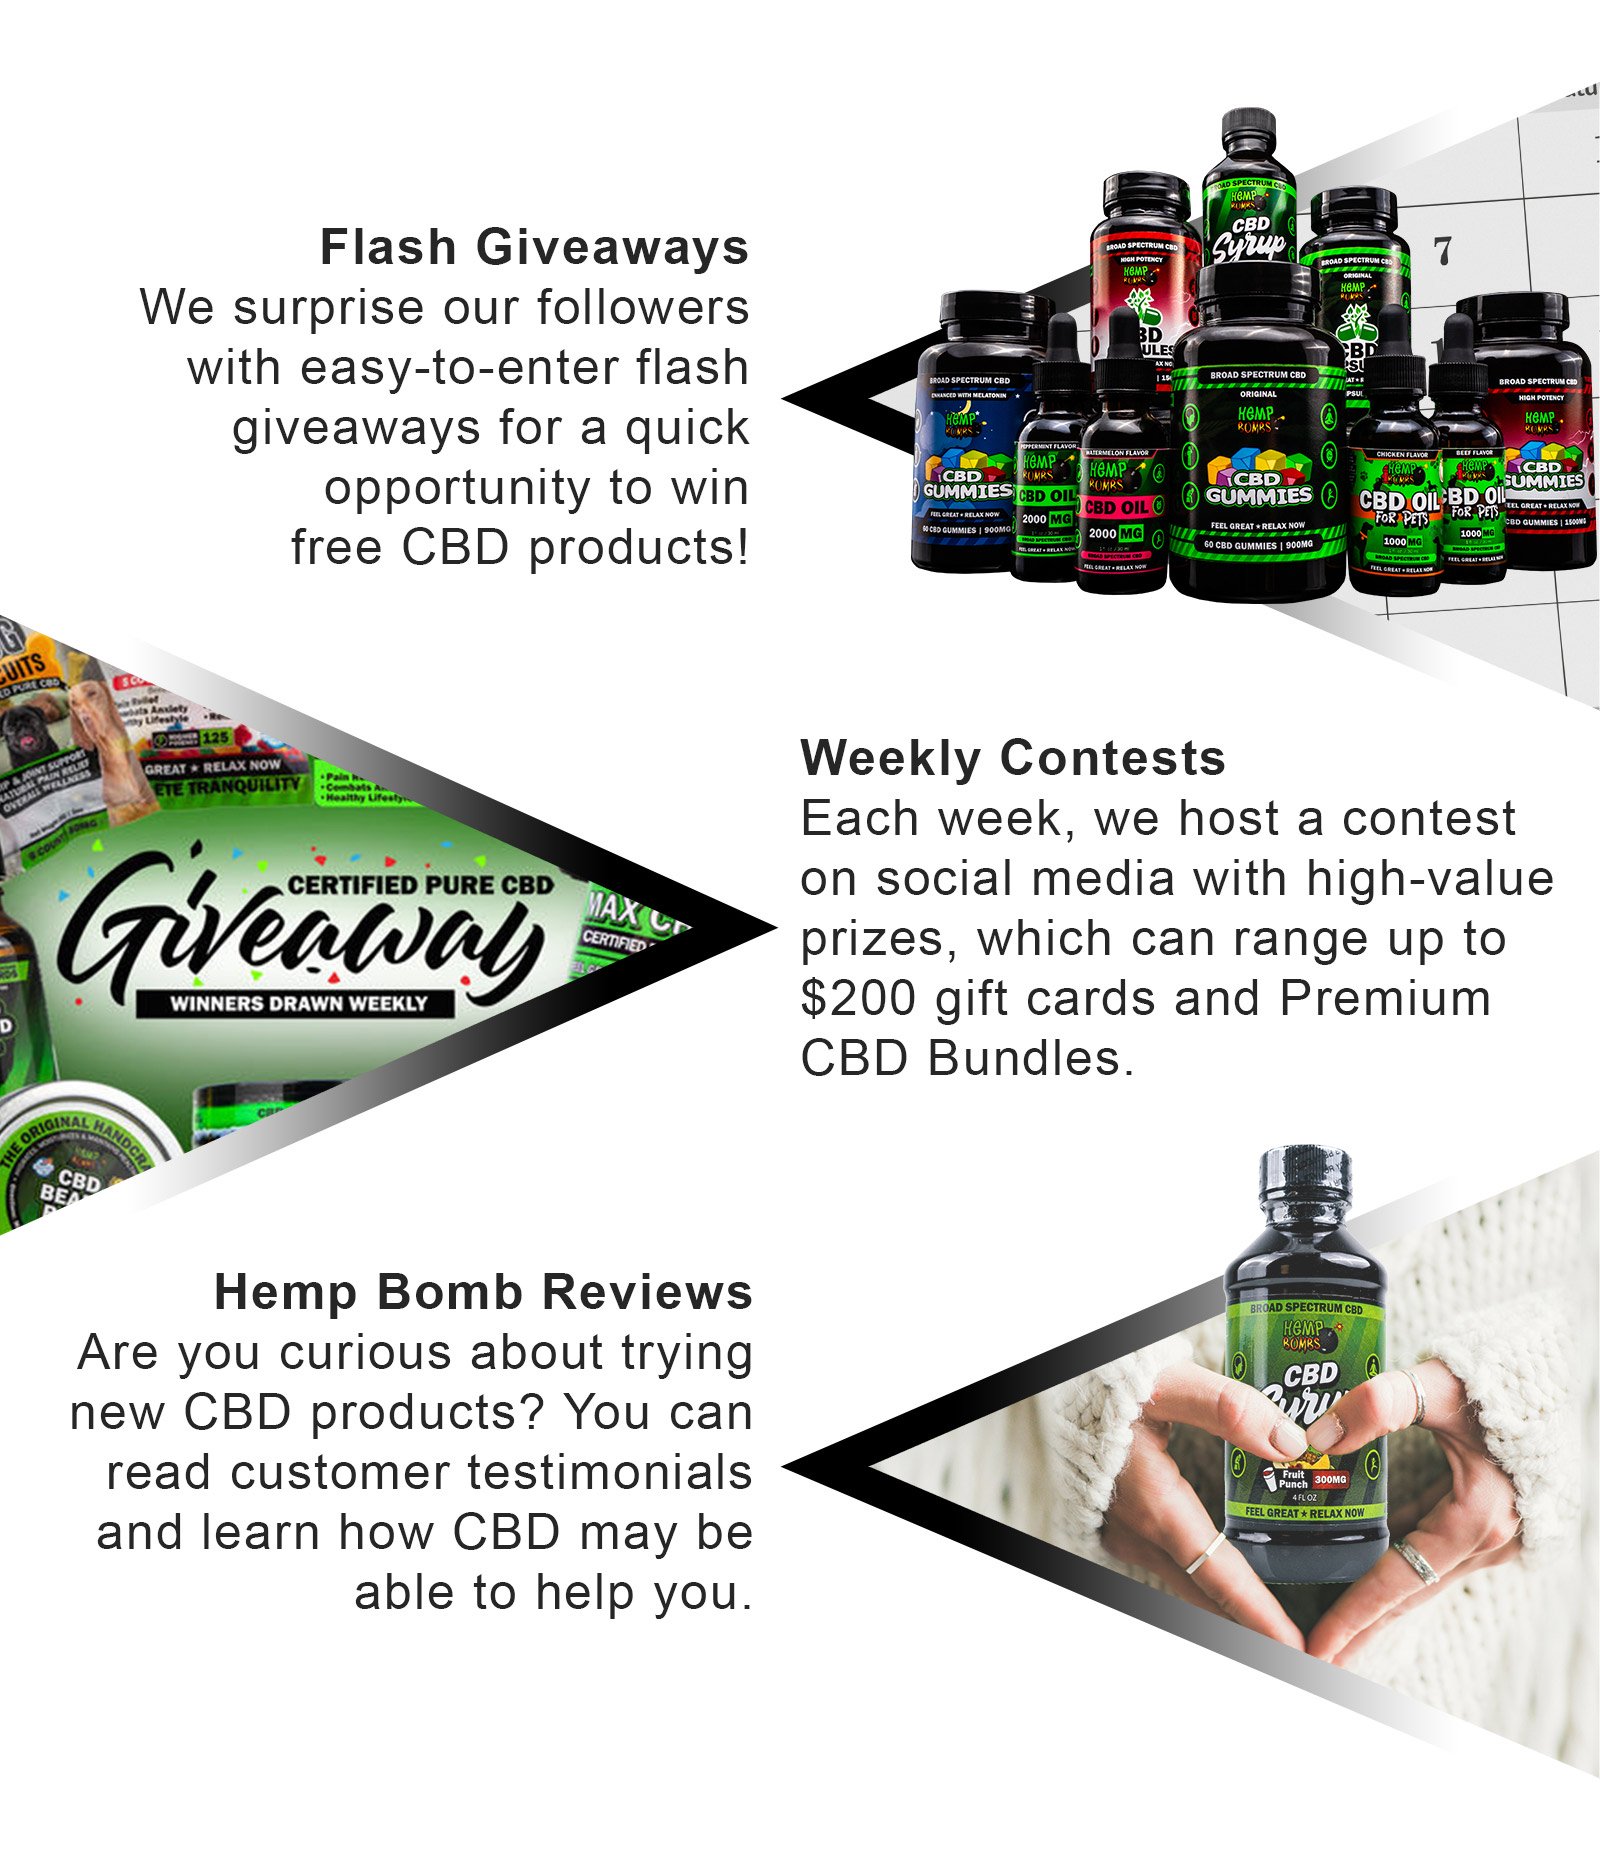 Flash Giveaways Aside from our weekly contest, we also surprise our followers with easy-to-enter flash giveaways for a quick opportunity to win free CBD products! Weekly Contests Each week, we host a contest on social media with high-value prizes, which can range up to $200 gift cards and Premium CBD Bundles.  Hemp Bomb Reviews Are you curious about trying new CBD products? You can read customer testimonials and learn how CBD may be able to help you.